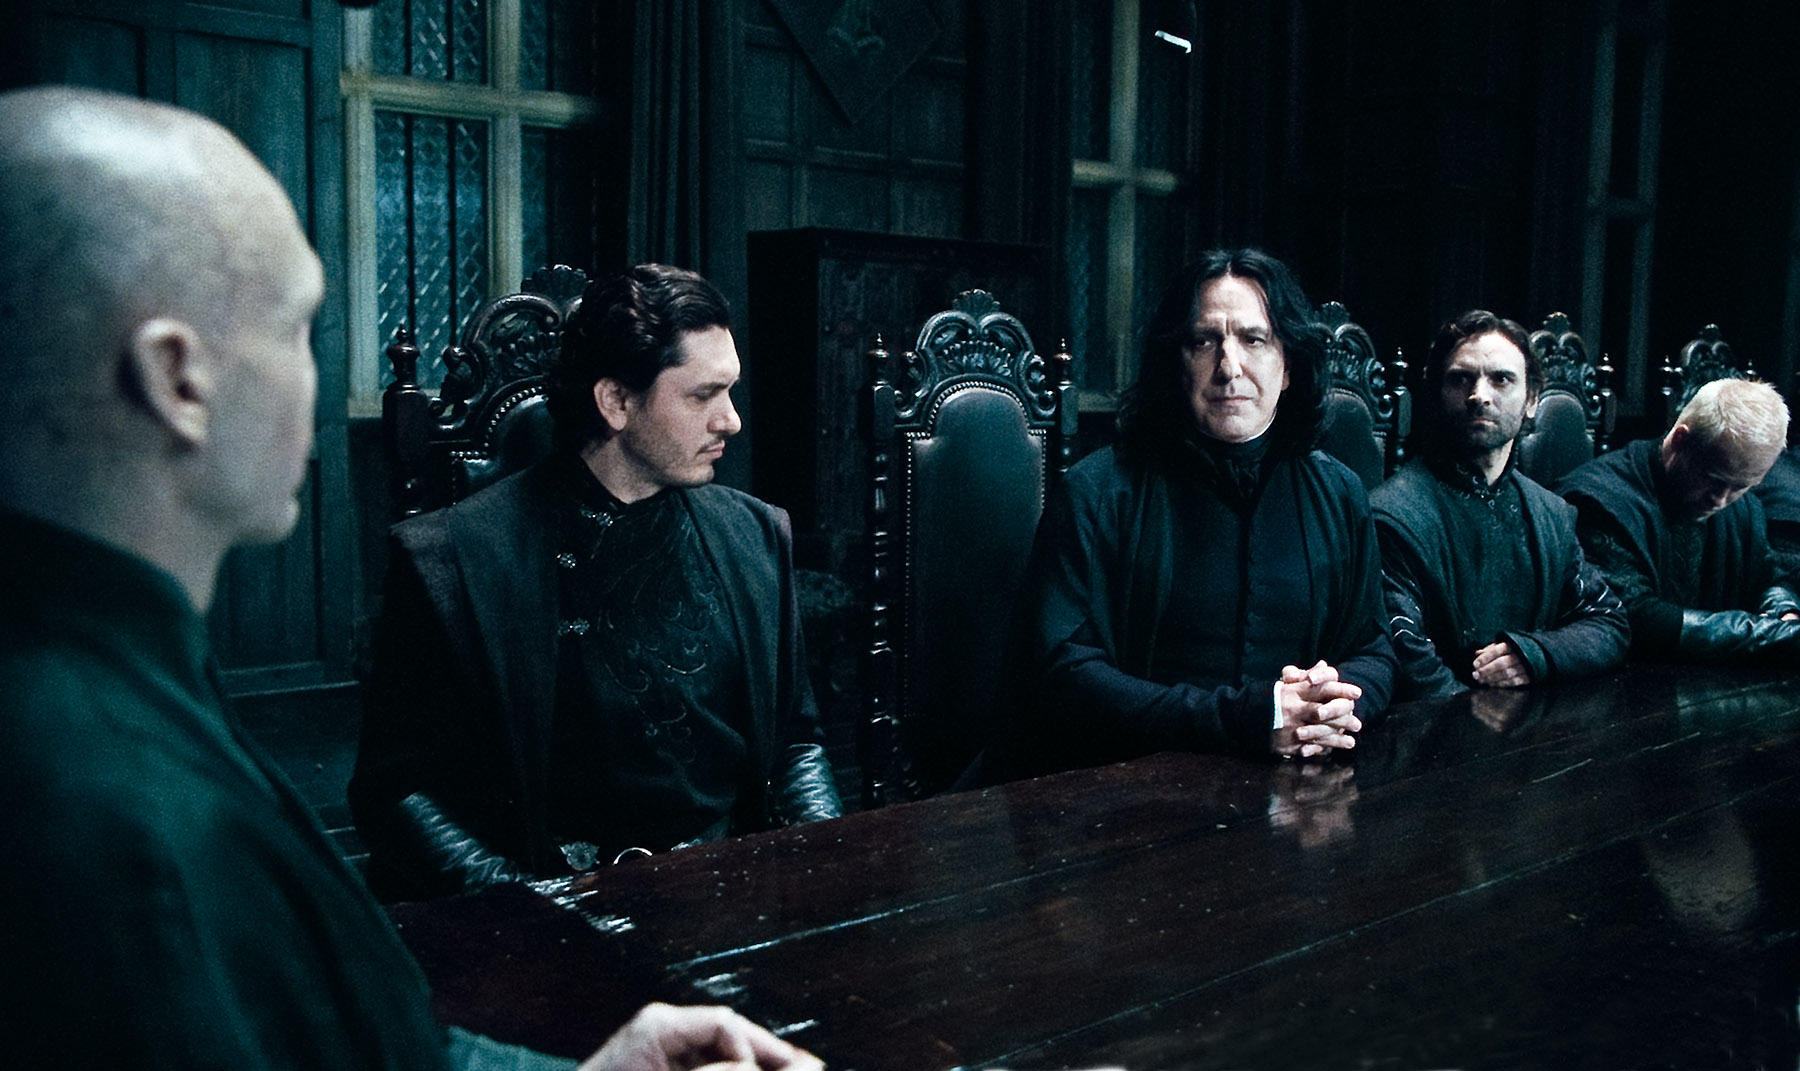 Harry Potter And The Deathly Hallows Part 1 Death Eaters - HD Wallpaper 